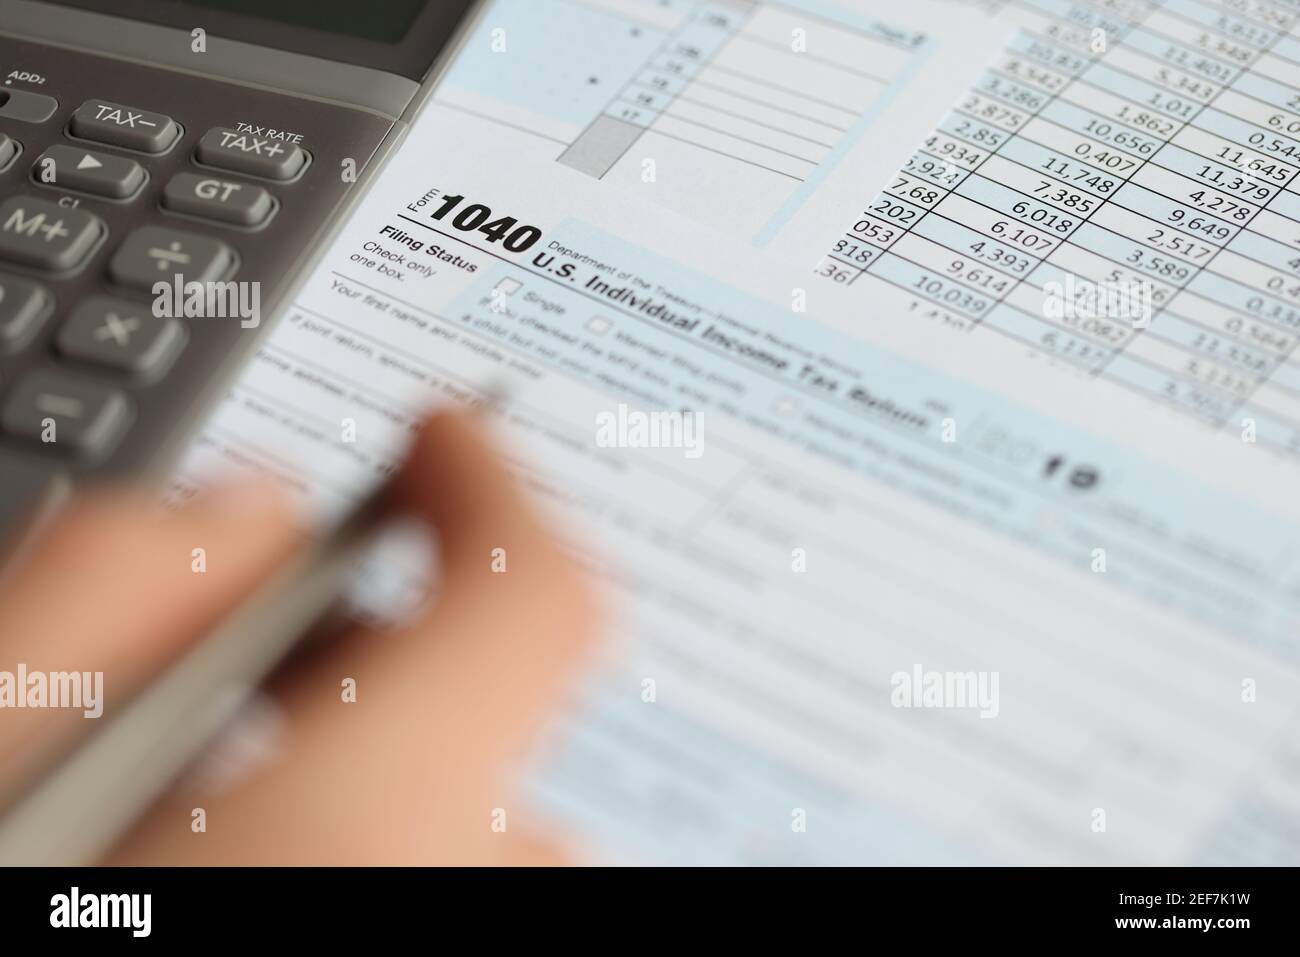 on-table-is-tax-deduction-form-and-calculator-stock-photo-alamy